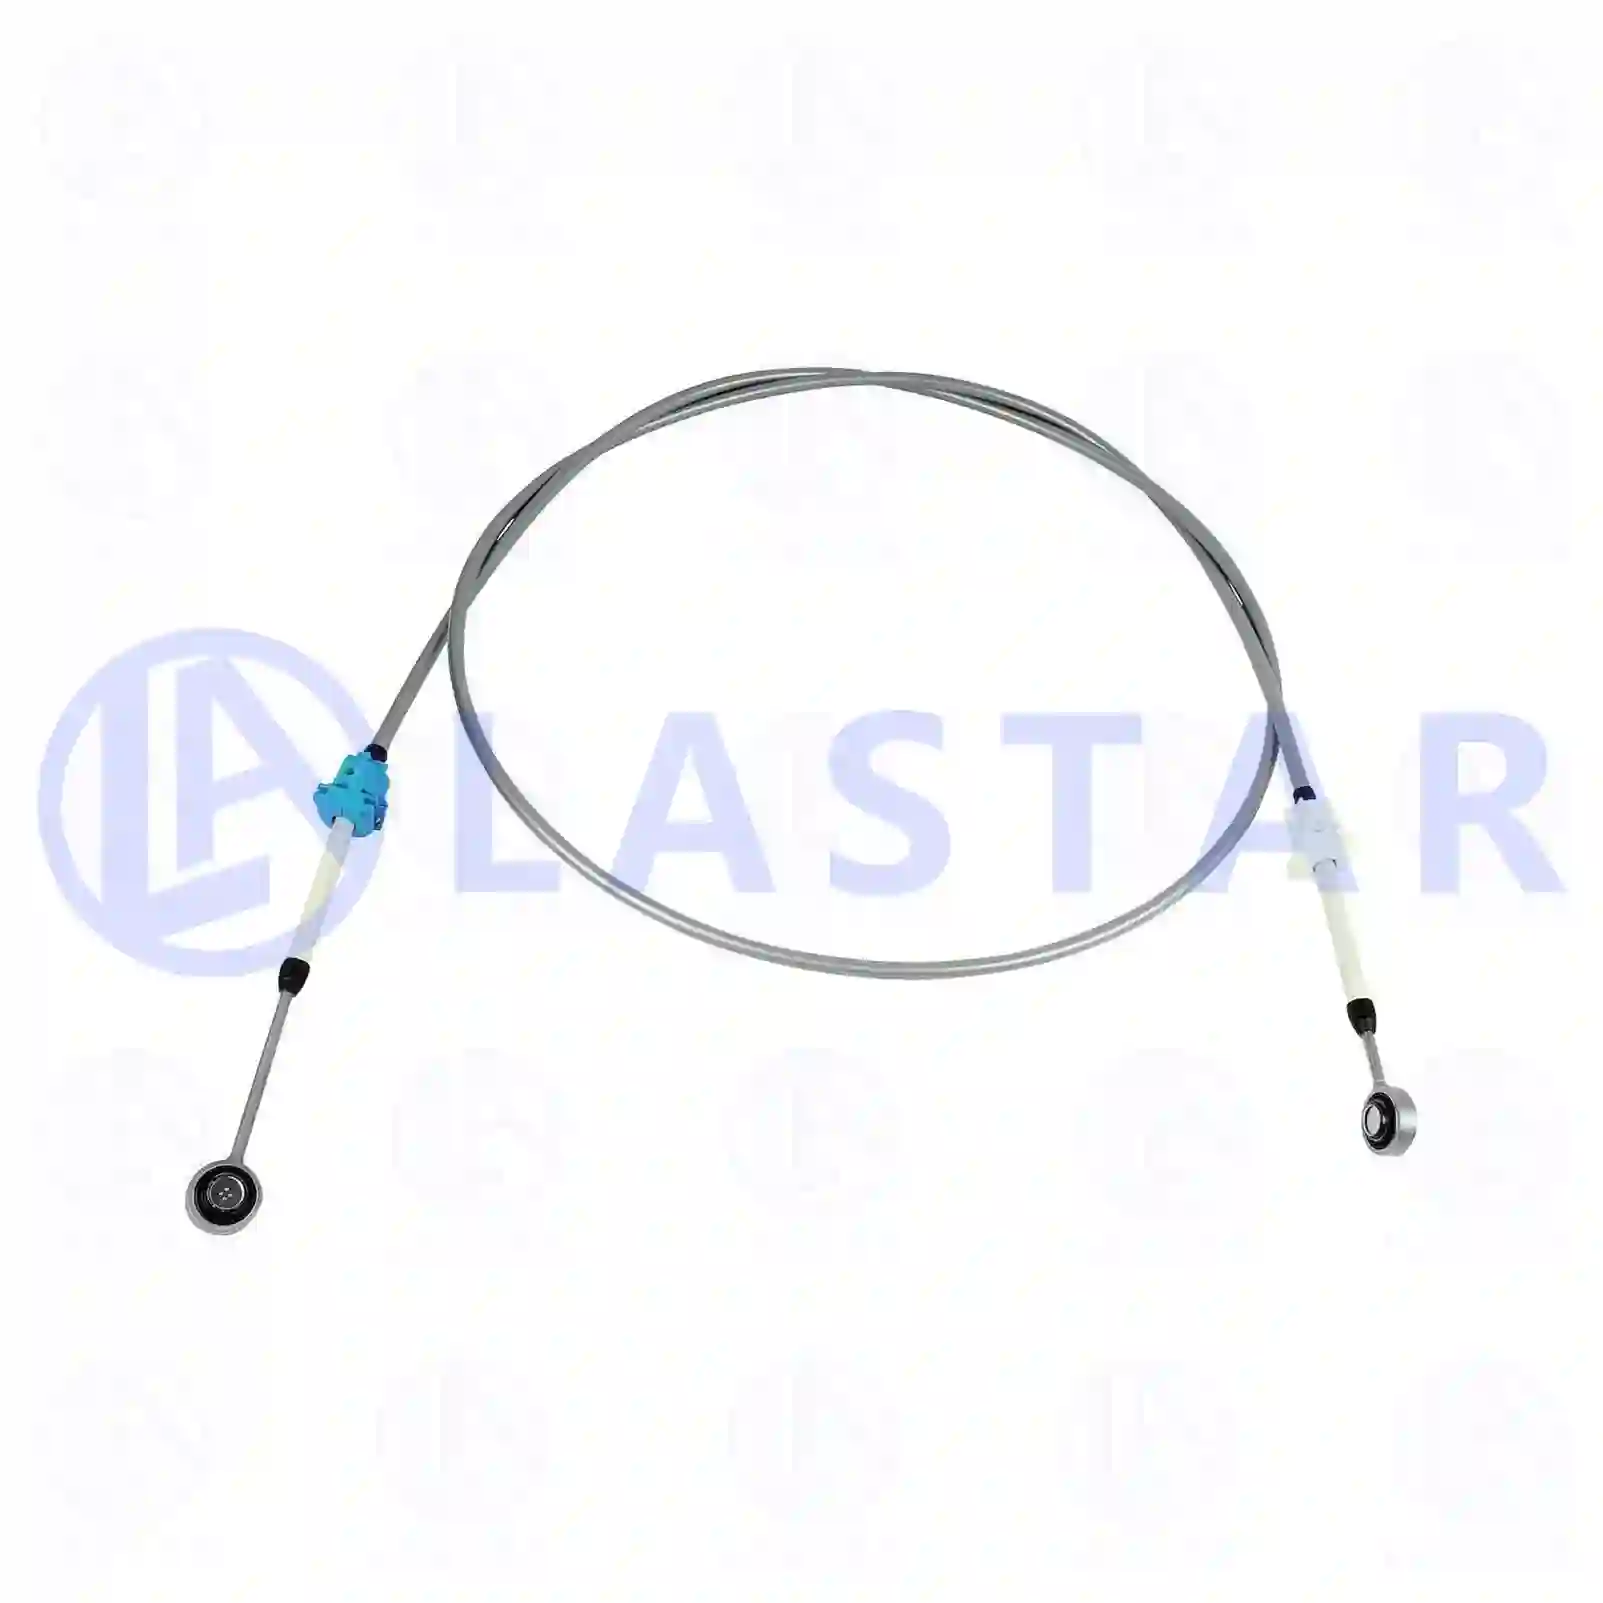 Control cable, switching, 77732094, 20545965, 20700965, 21002865, 21343565, 21789683 ||  77732094 Lastar Spare Part | Truck Spare Parts, Auotomotive Spare Parts Control cable, switching, 77732094, 20545965, 20700965, 21002865, 21343565, 21789683 ||  77732094 Lastar Spare Part | Truck Spare Parts, Auotomotive Spare Parts